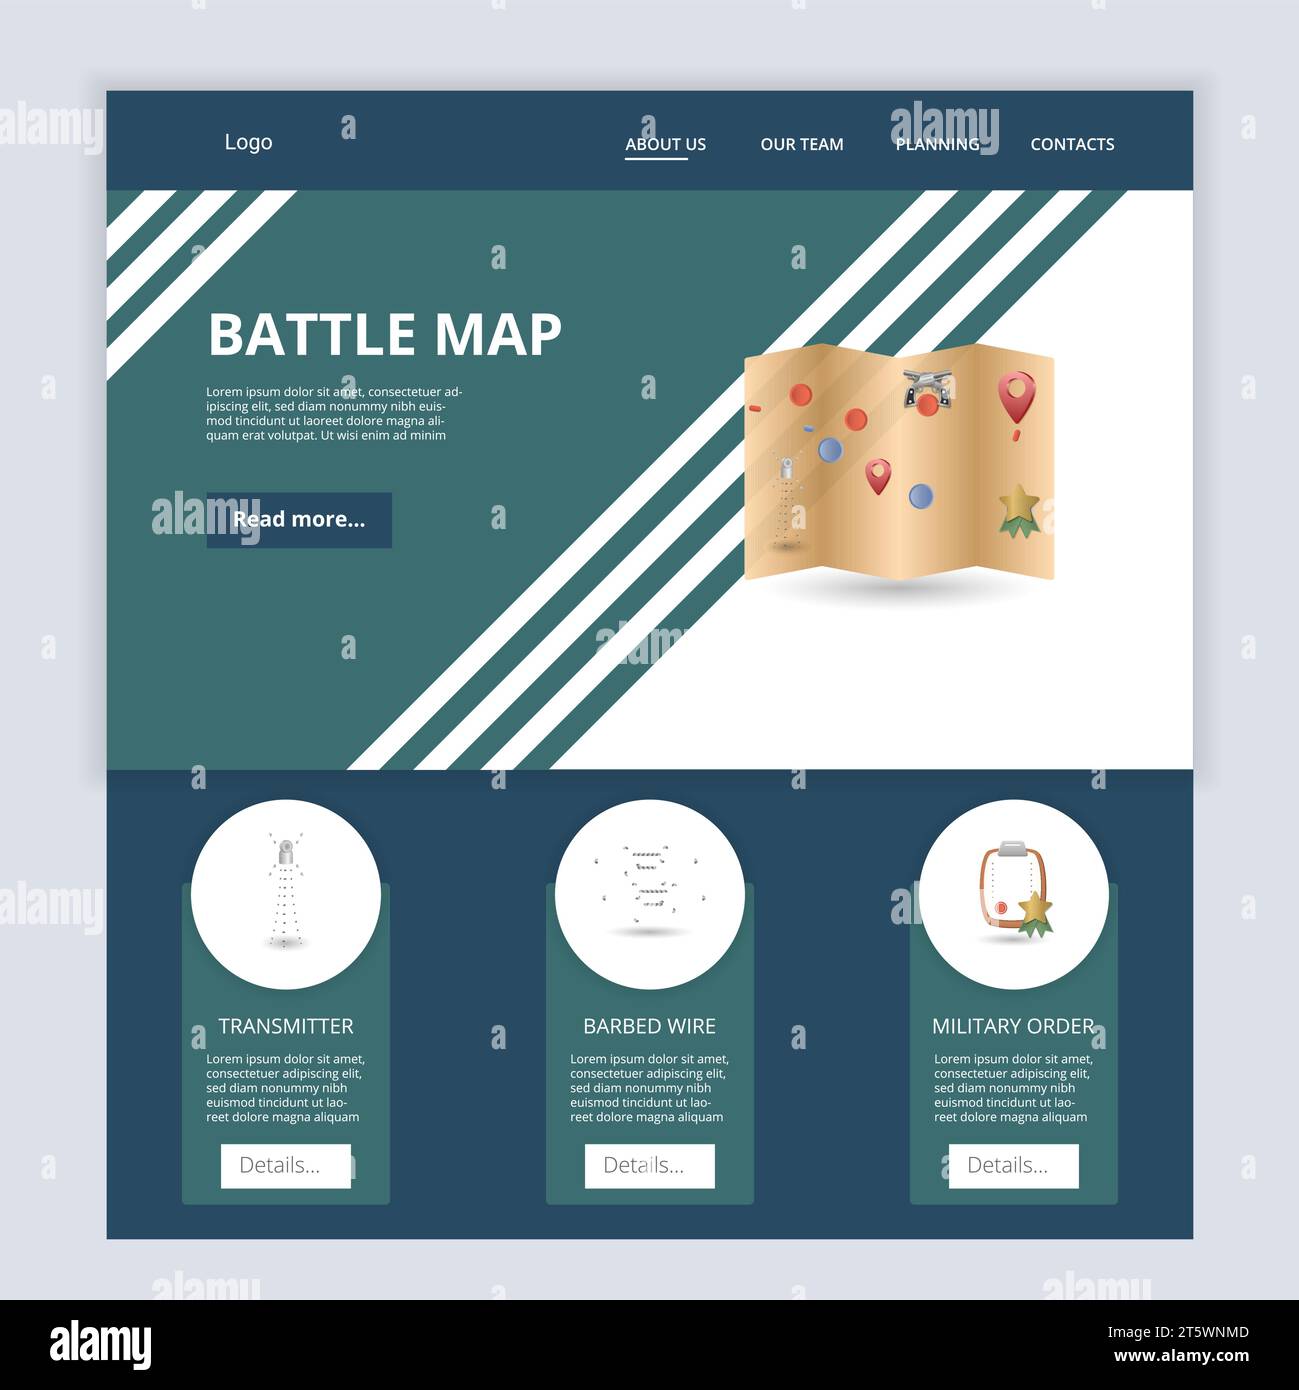 Battle map flat landing page website template. Transmitter, barbed wire, military order. Web banner with header, content and footer. Vector Stock Vector